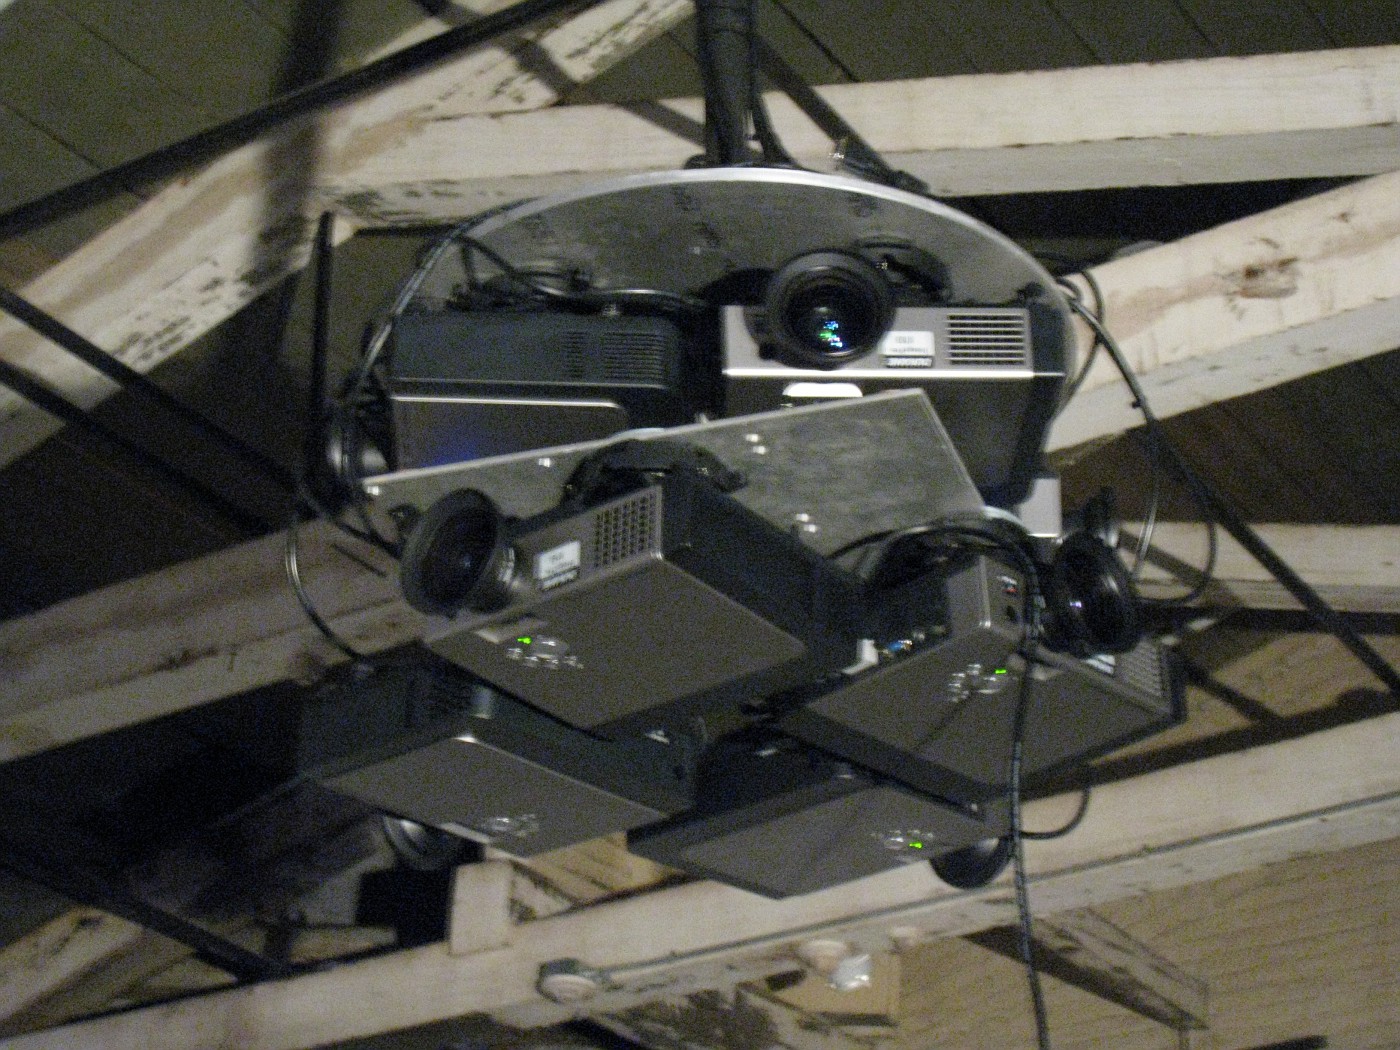 Circular projection system with 8 projectors